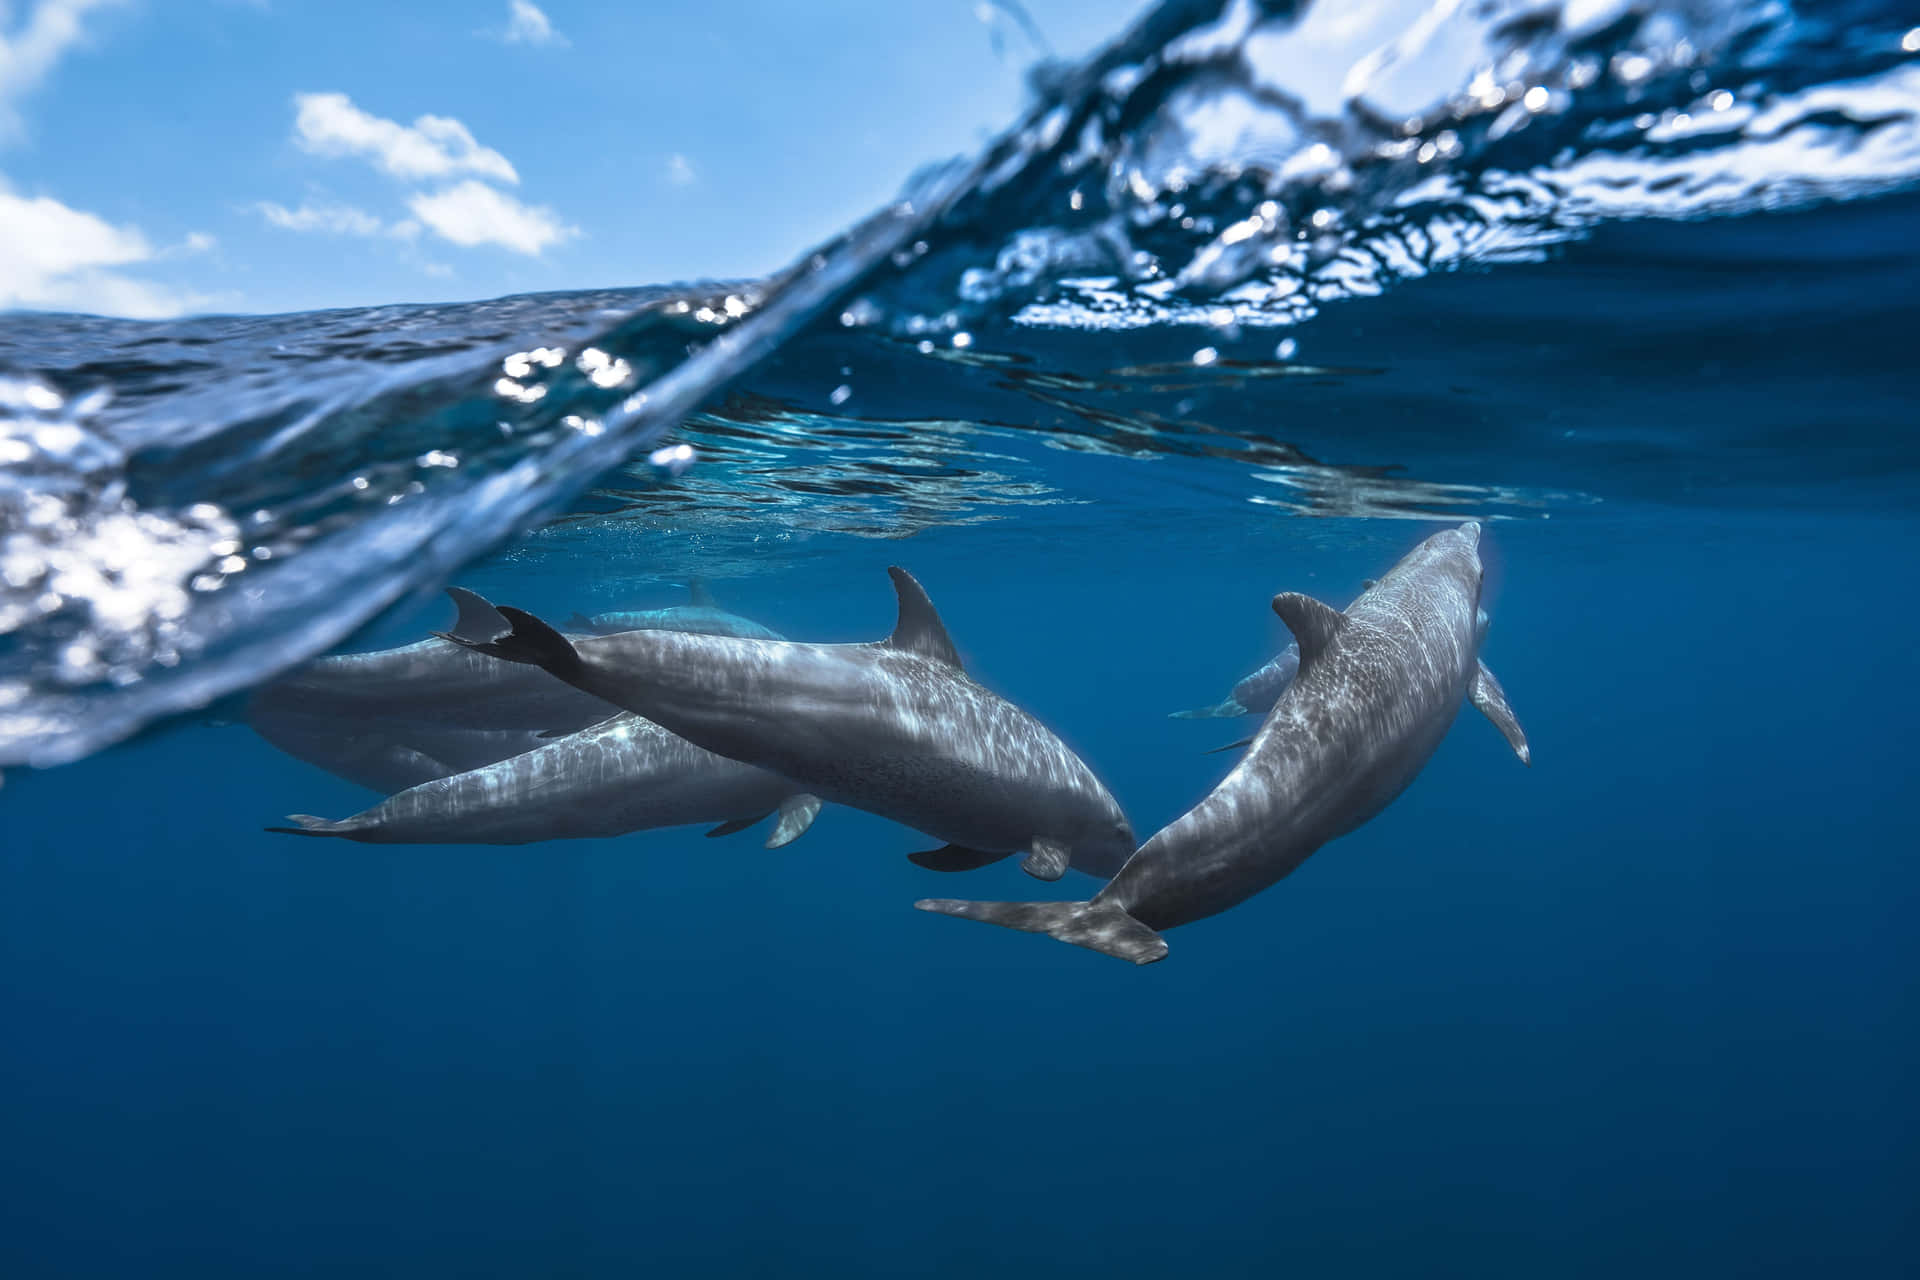 Two dolphins swimming together in the ocean